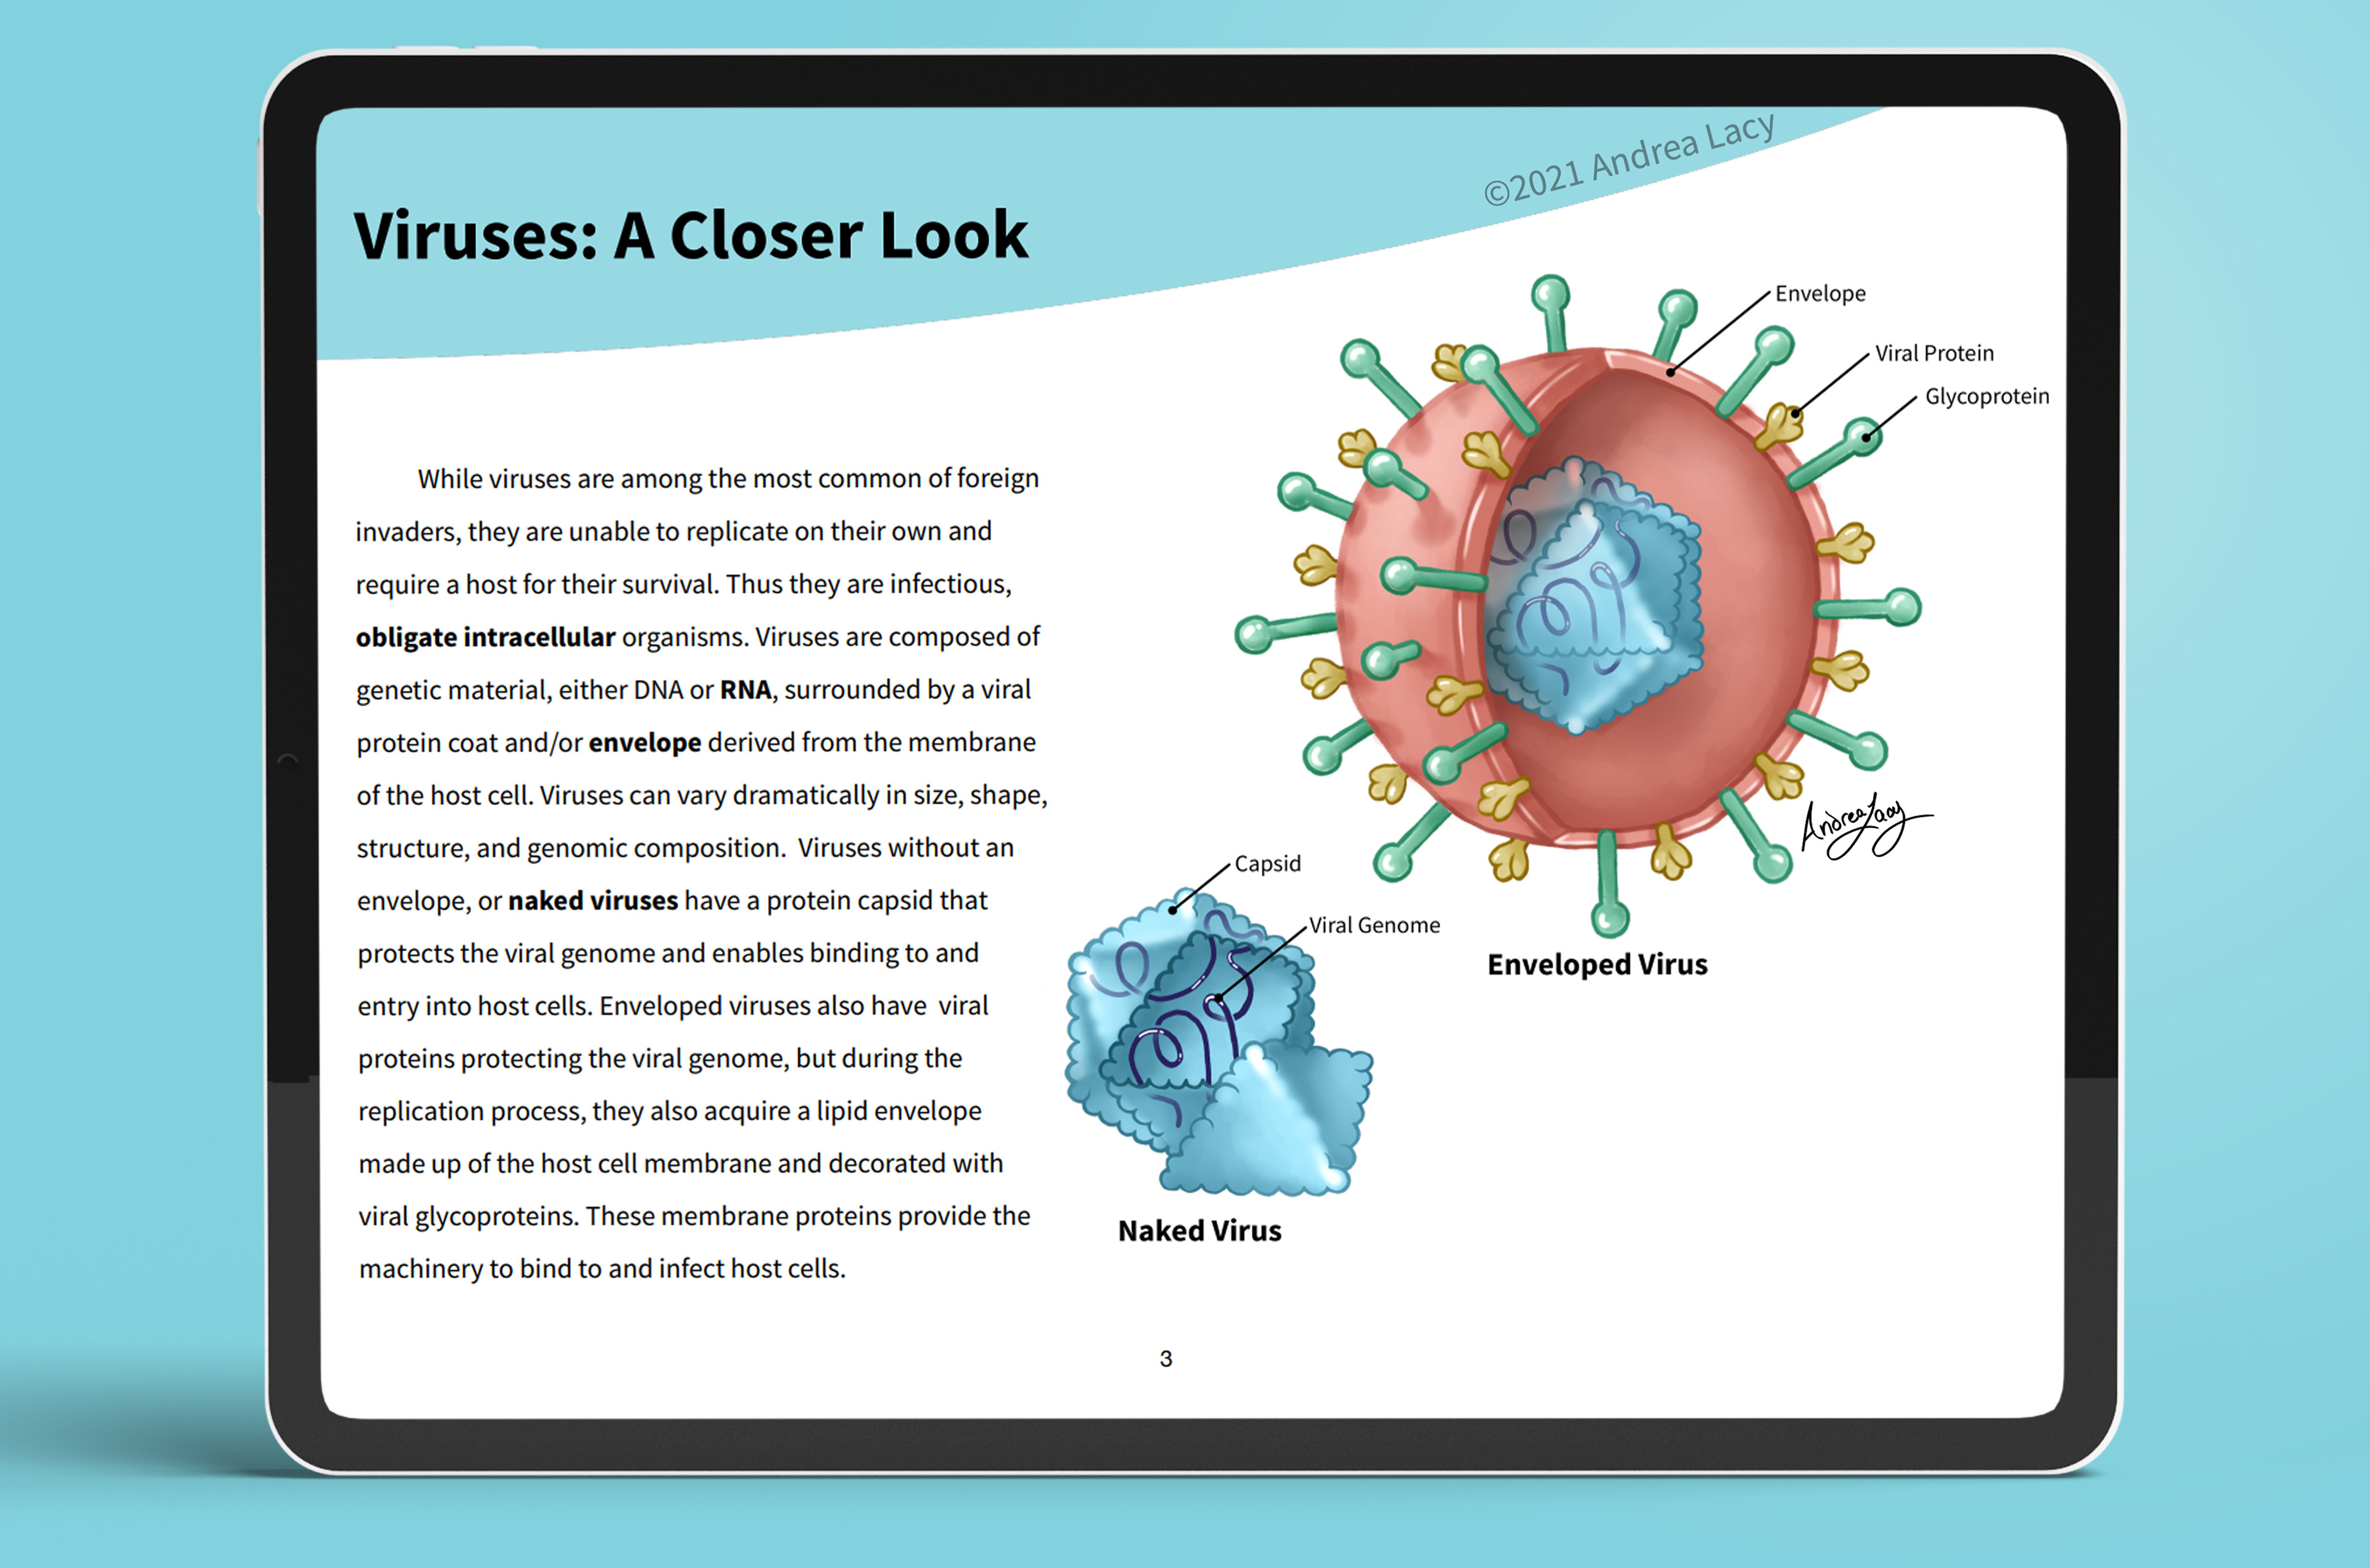 Section 1 includes an overview of the anatomy of viruses.